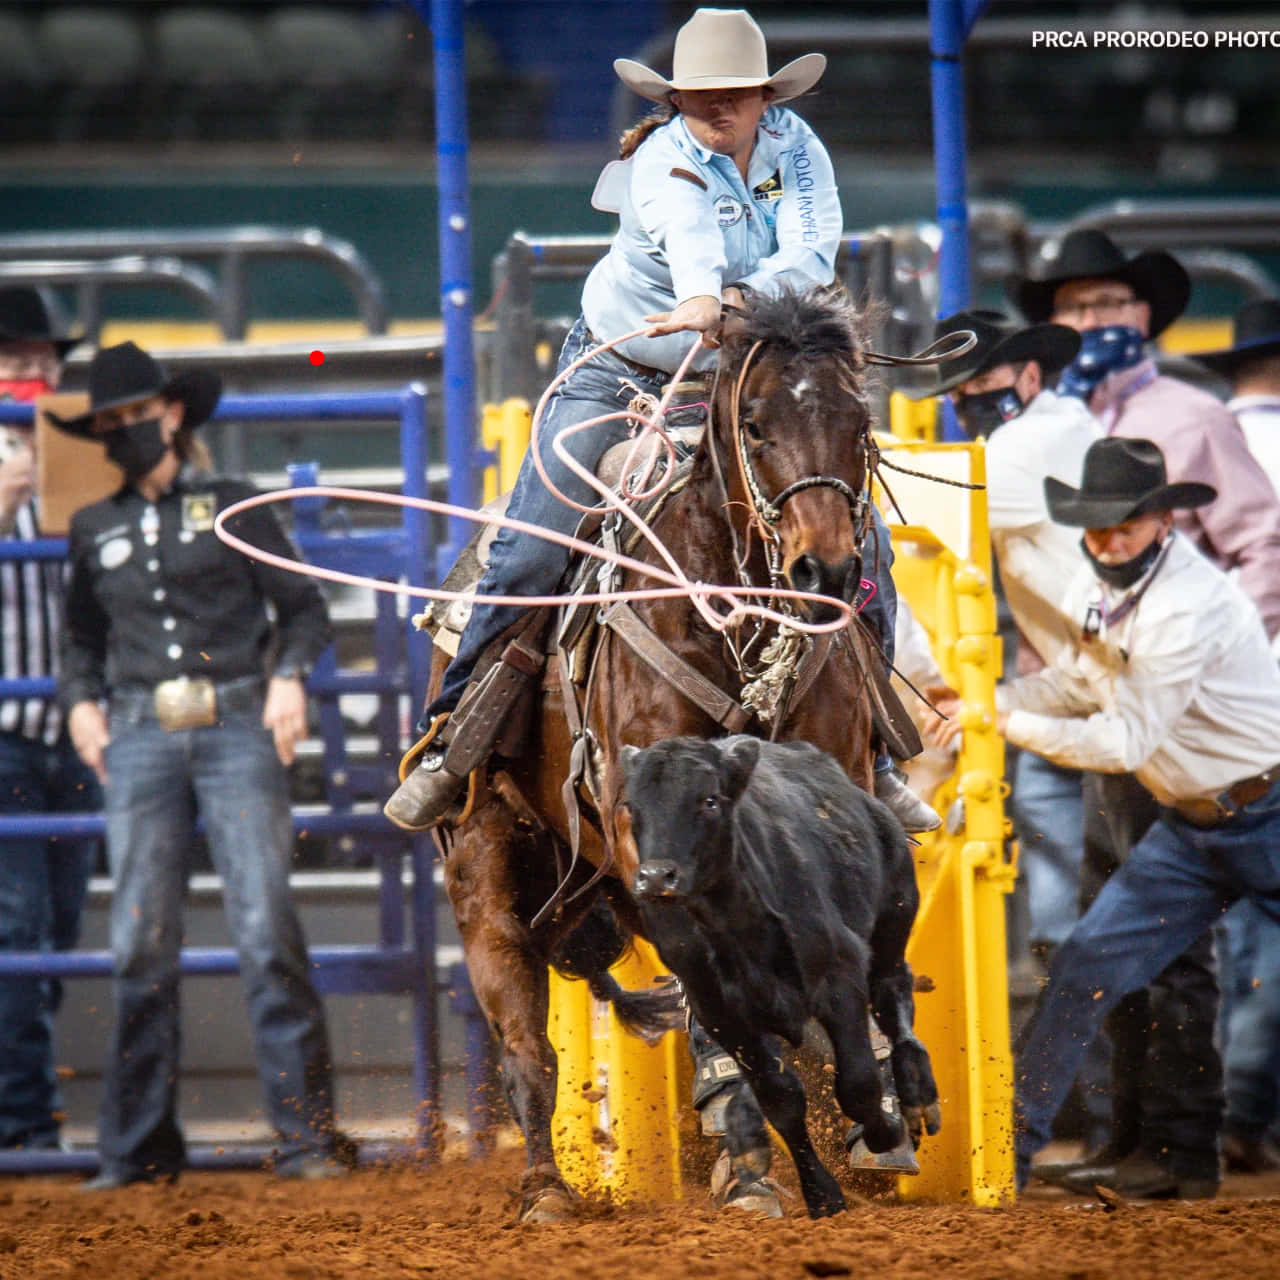 Cowboys in Action During Team Roping Wallpaper